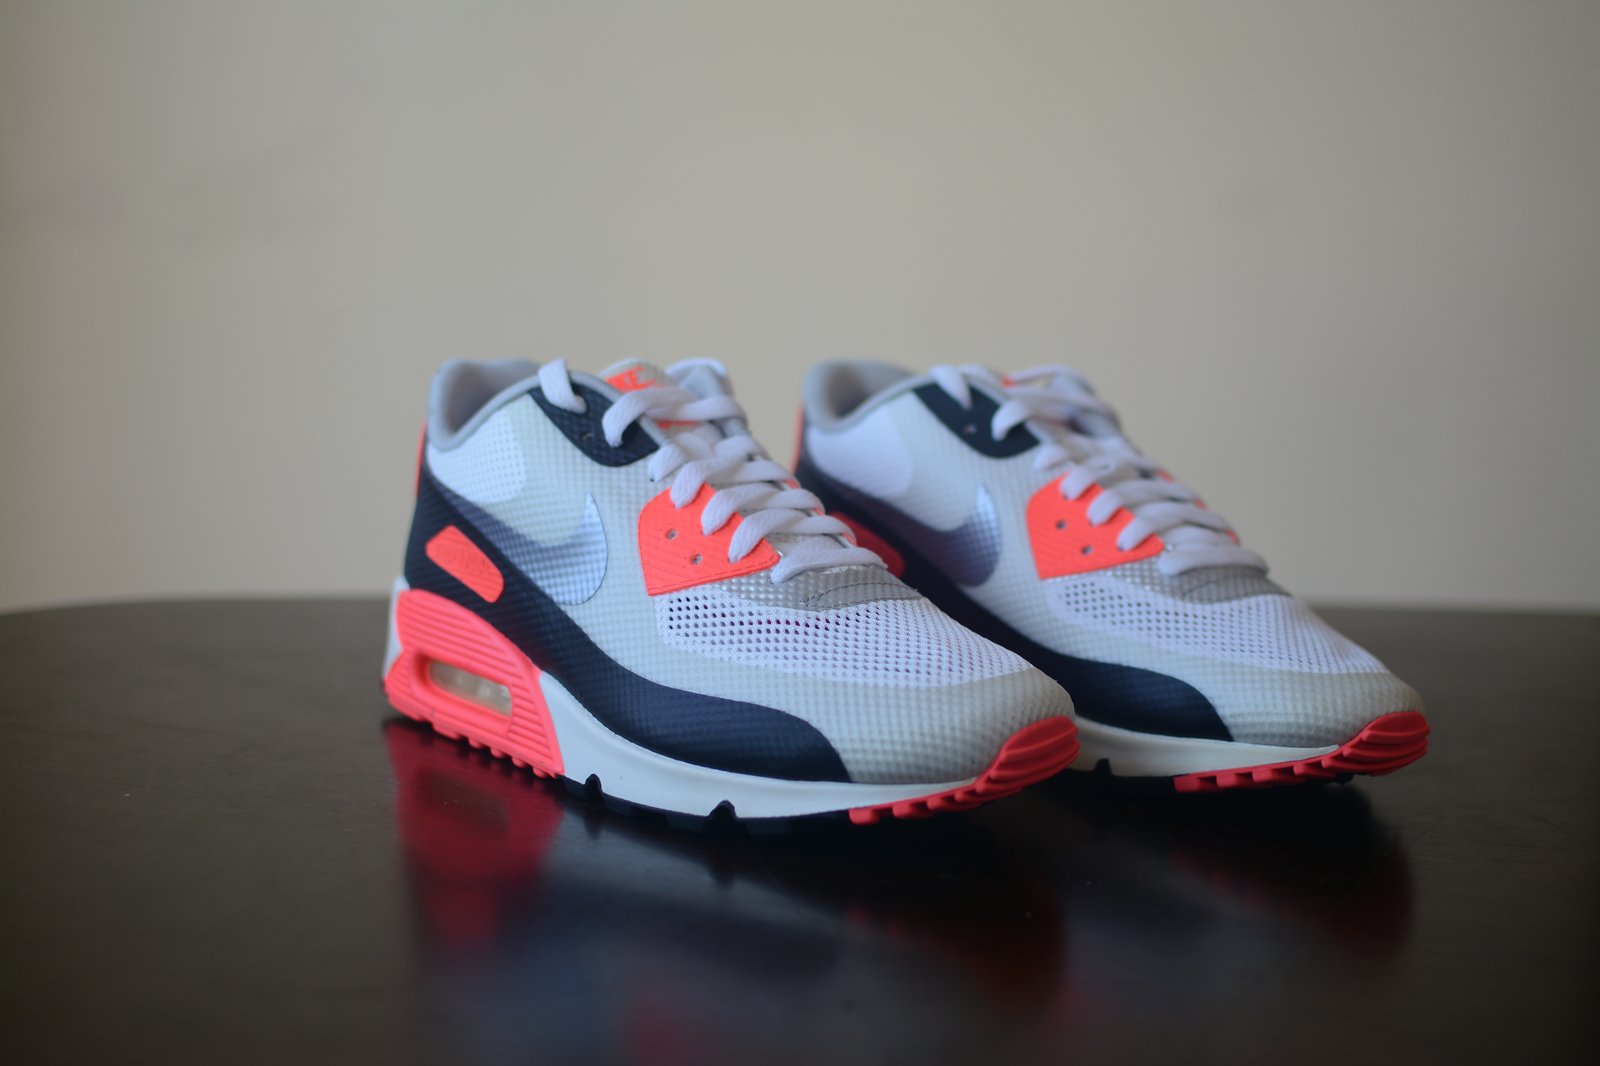 air max 90 hyperfuse infrared